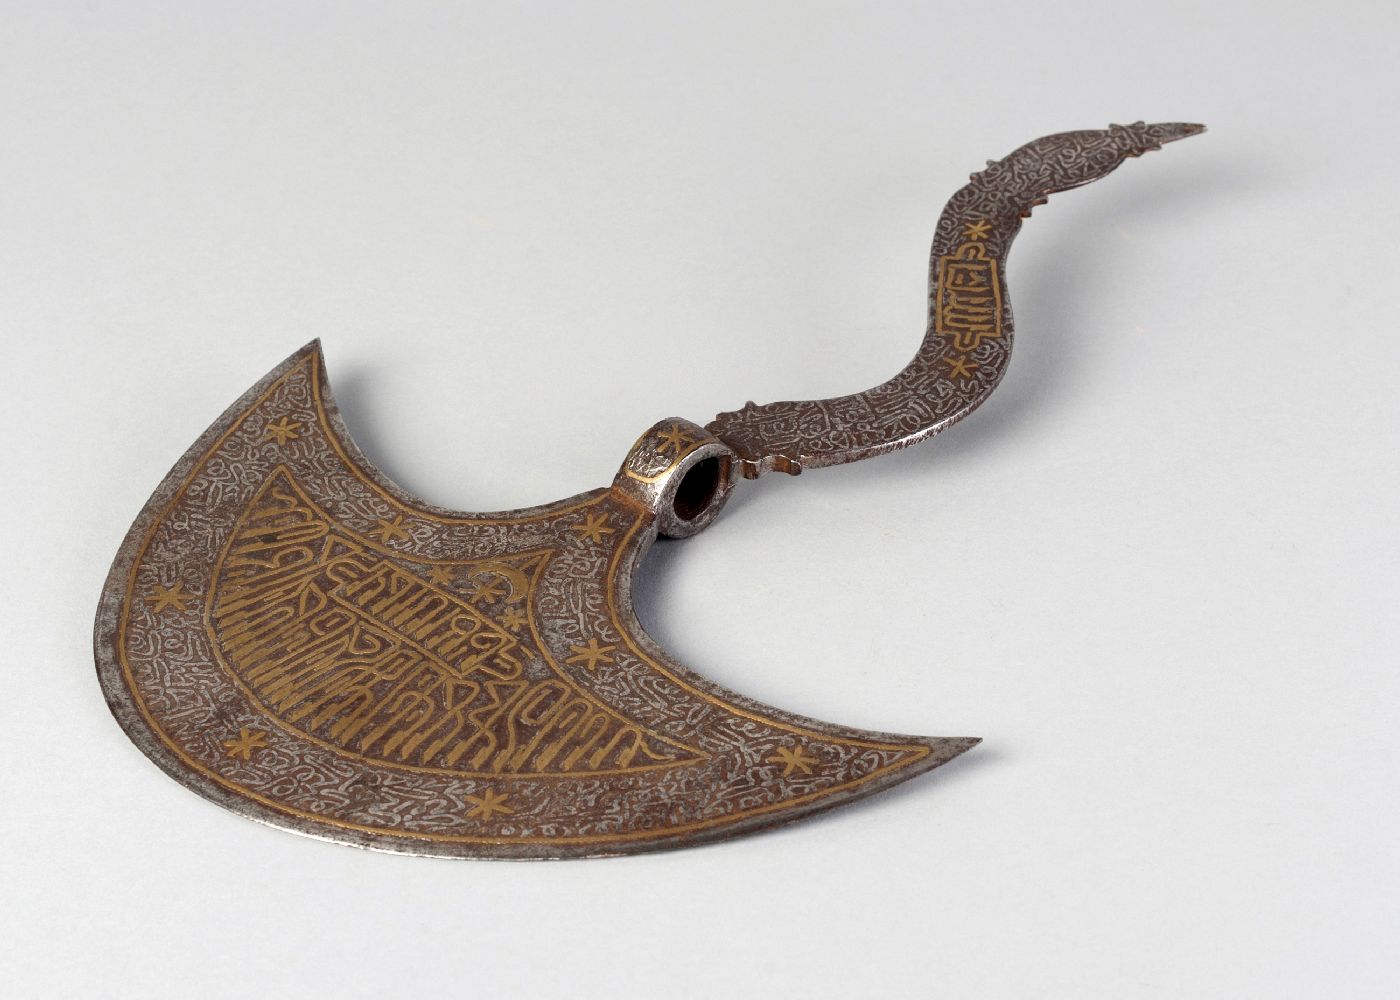 A damascened steel ceremonial axe head, tabar, 19th century, inlaid with bands of calligraphy